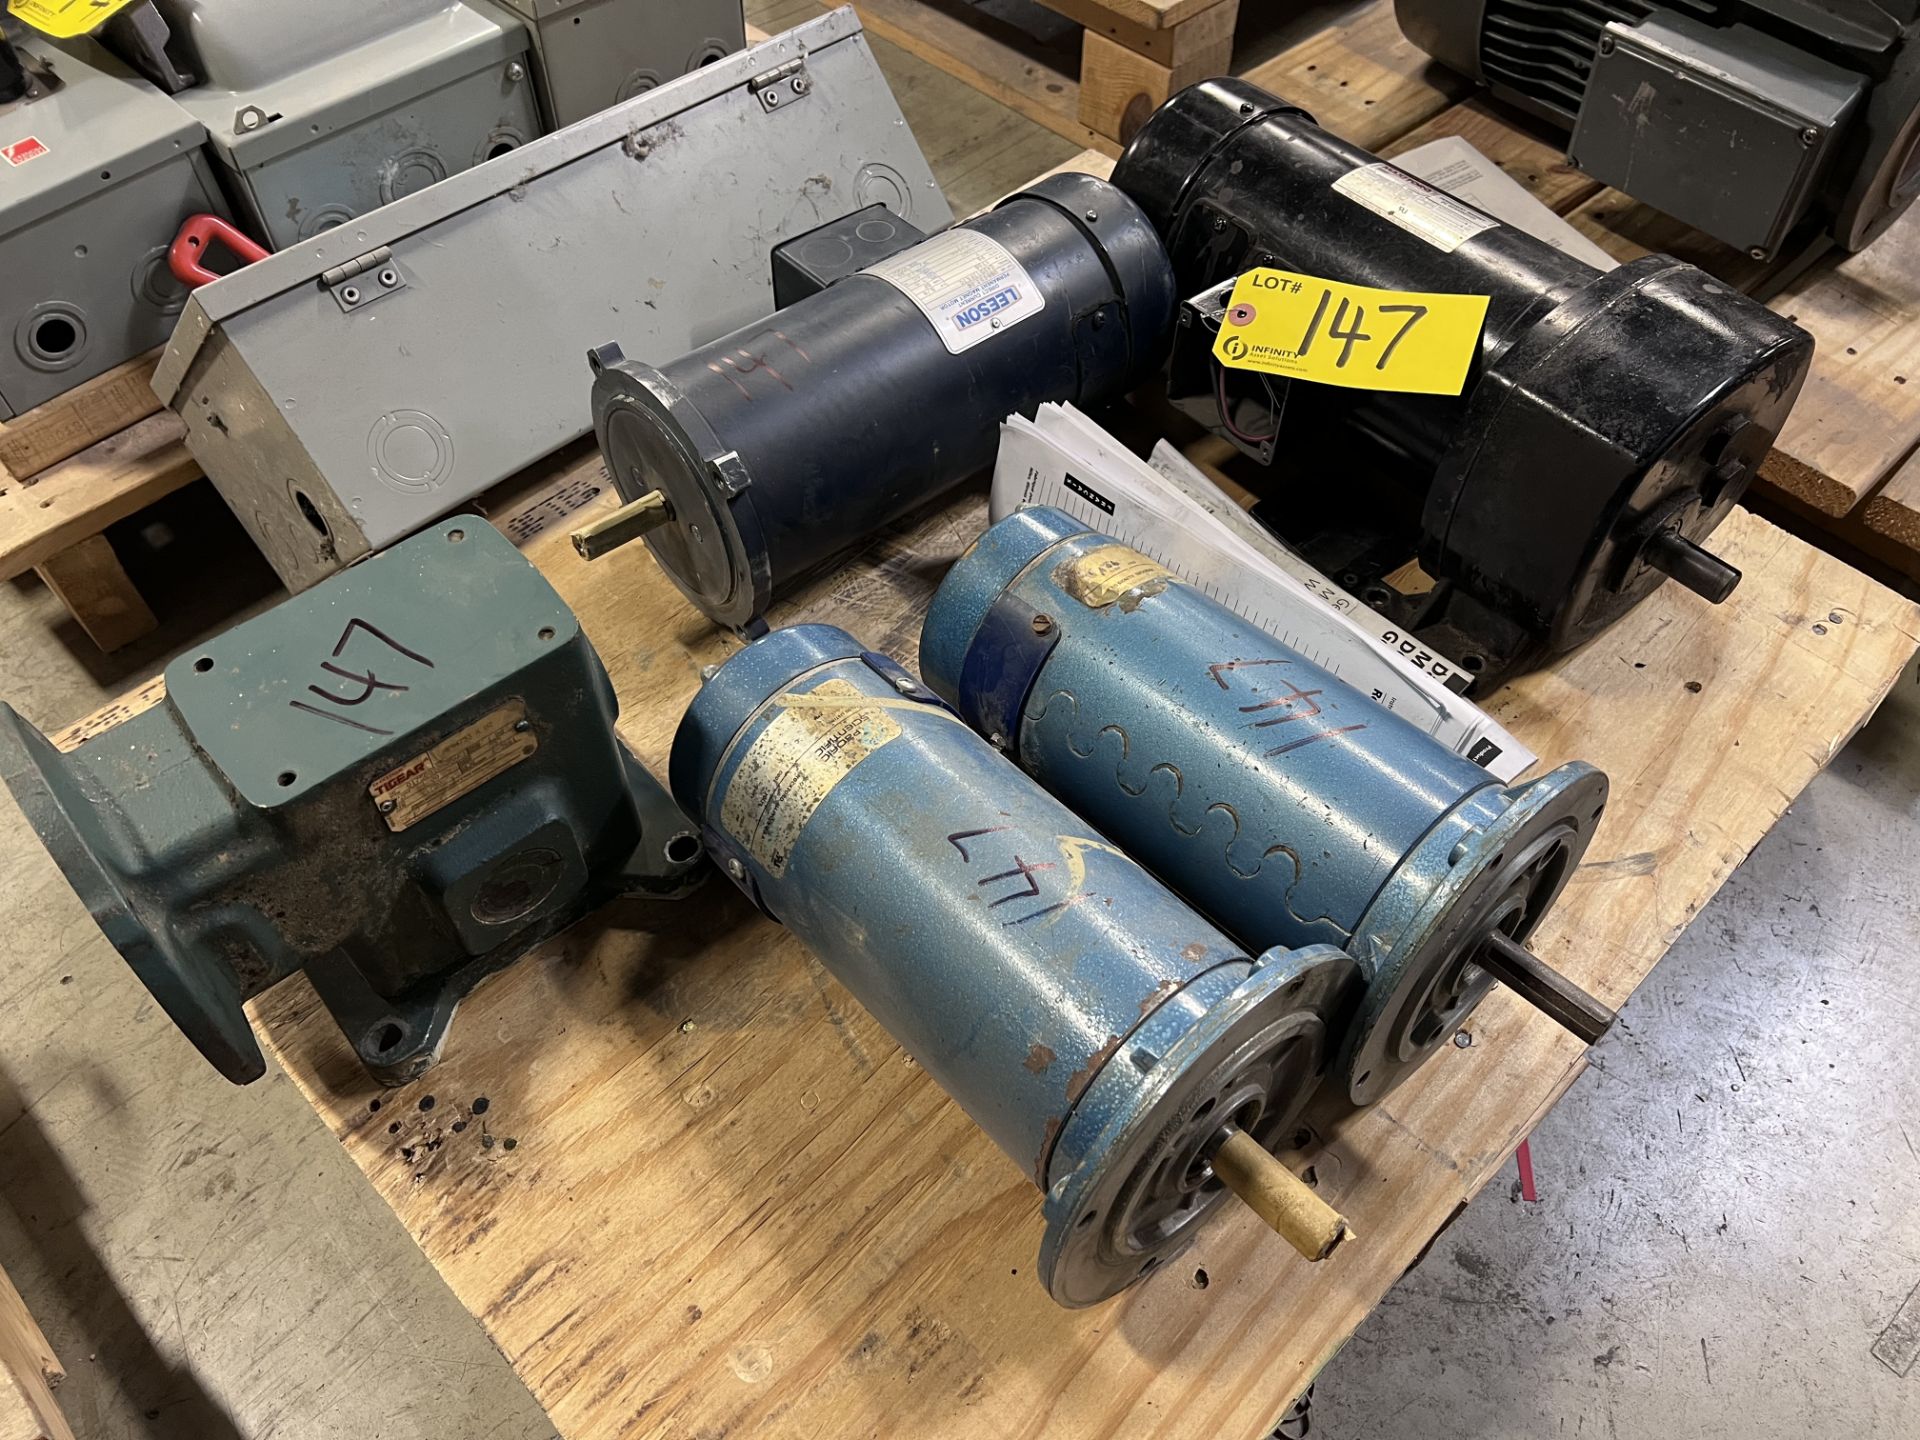 LOT OF (4) MOTORS AND (1) GEARBOX ON PALLET, (2) PACIFIC SCIENTIFIC 1/2HP, MAXITORO 1/2HP, LEESON